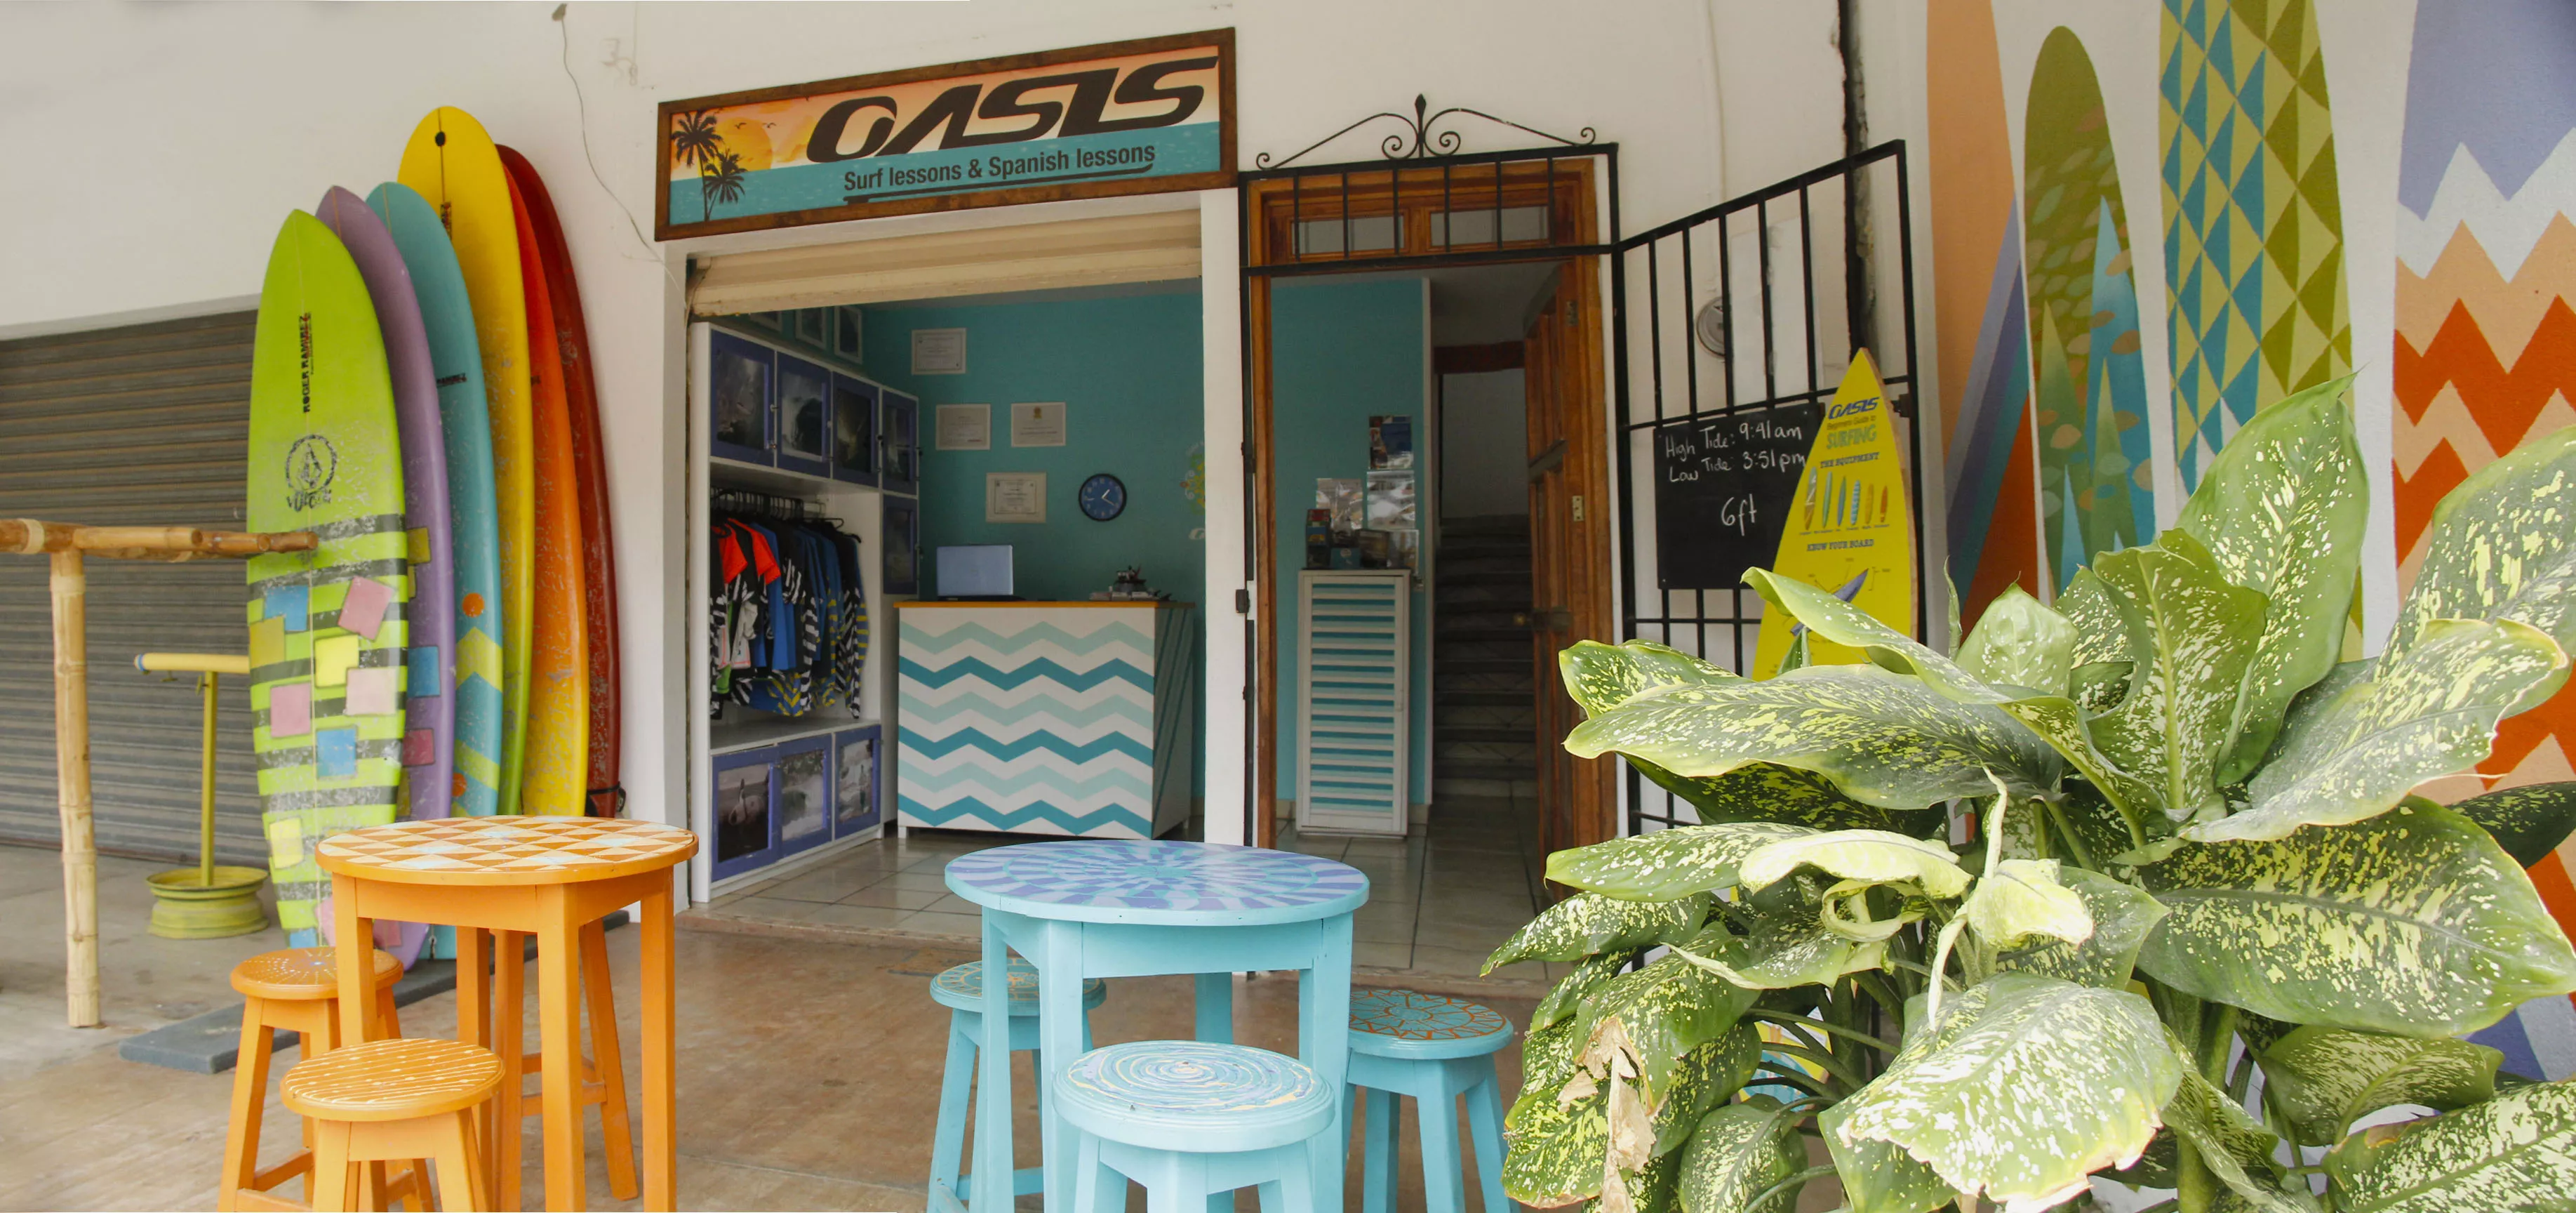 Oasis Spanish & Surf School in Mexico, North America | Surfing - Rated 3.7